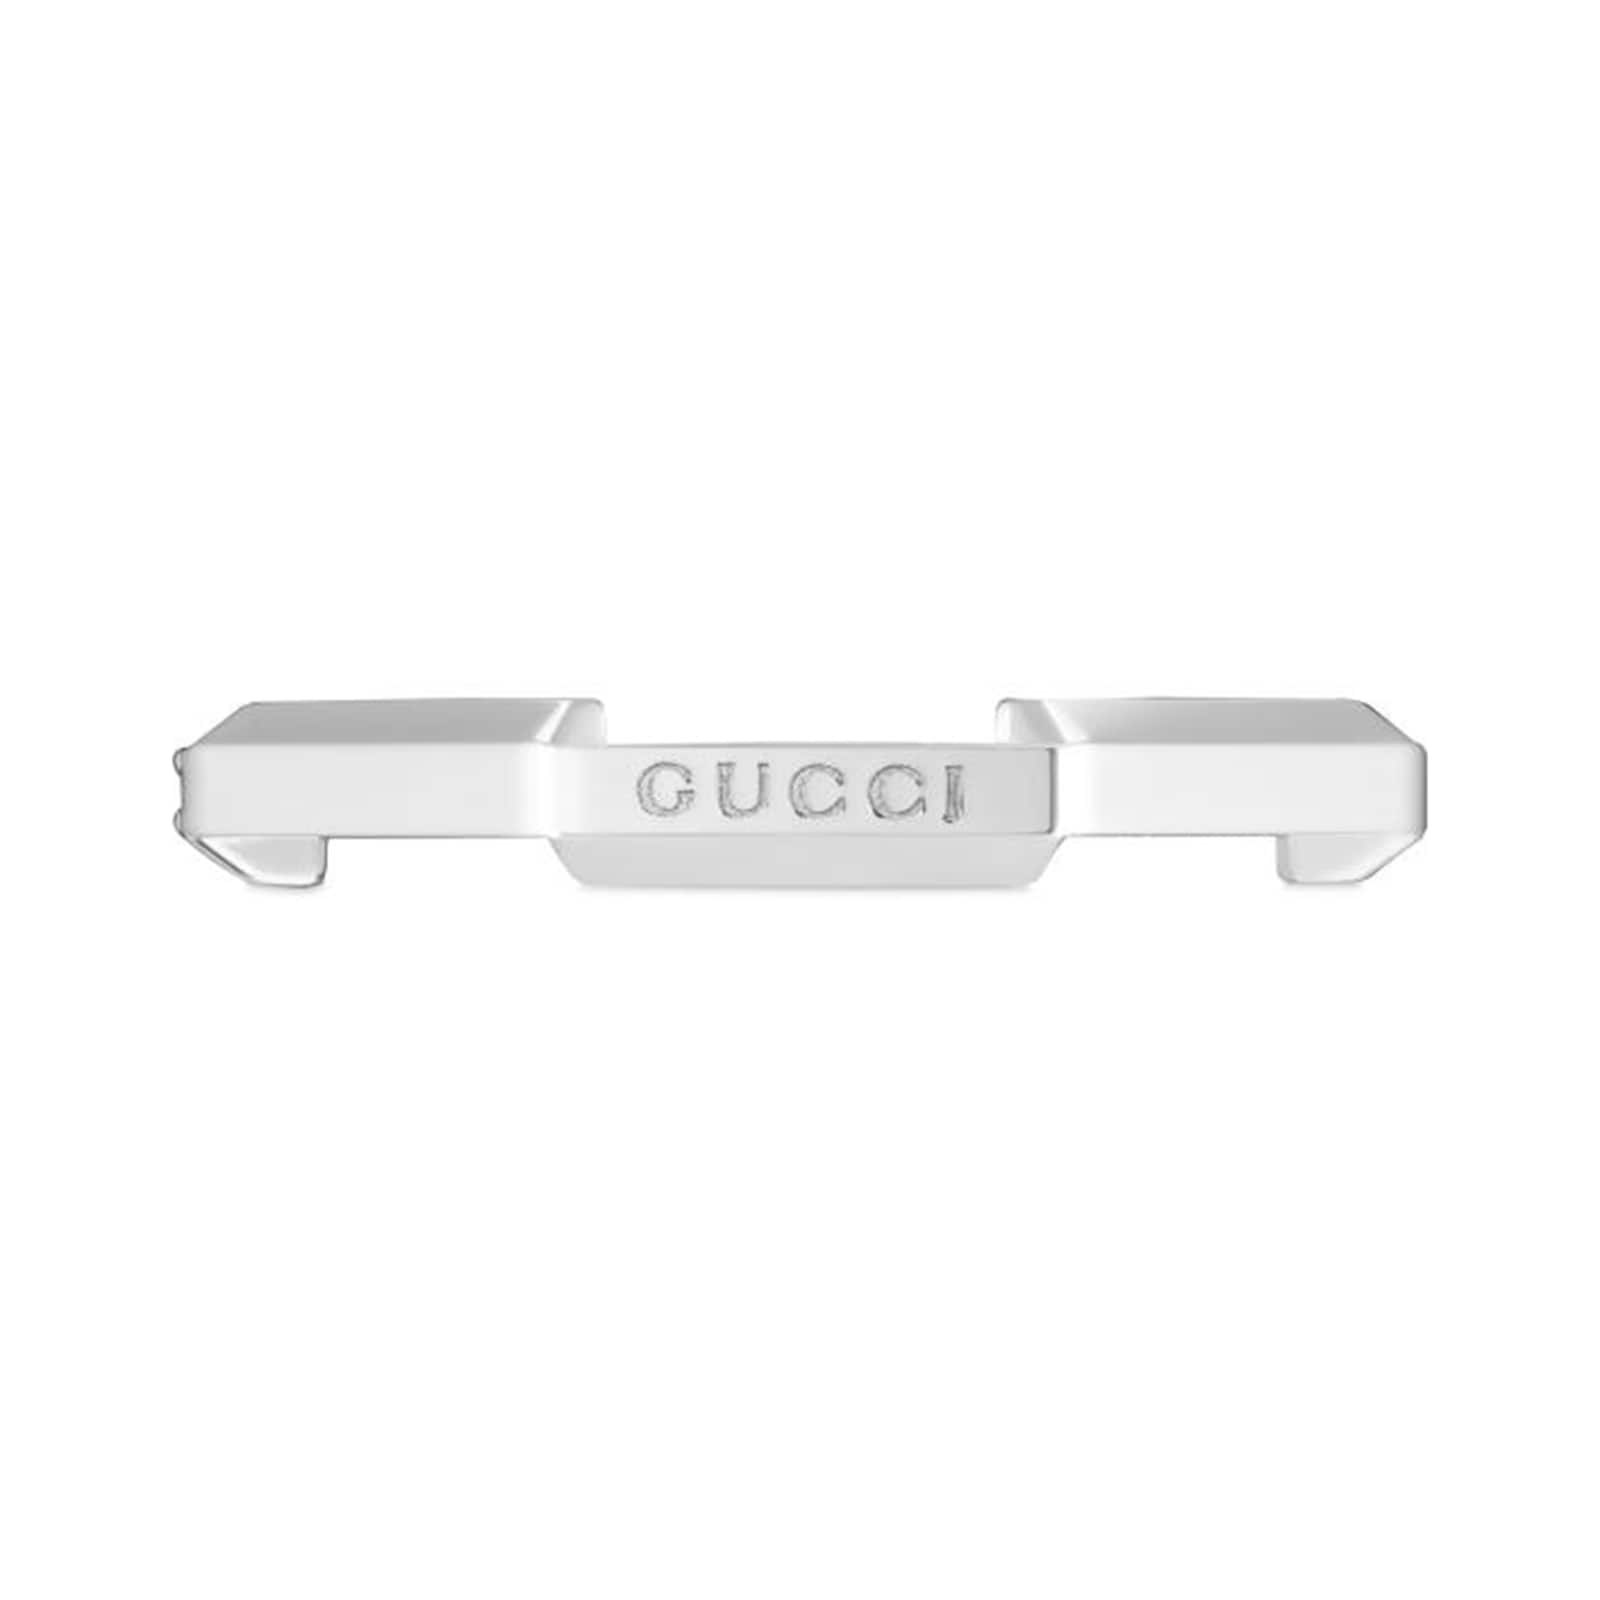 18ct White Gold Gucci Gucci Link to Love Diamond Ring Size 5.75